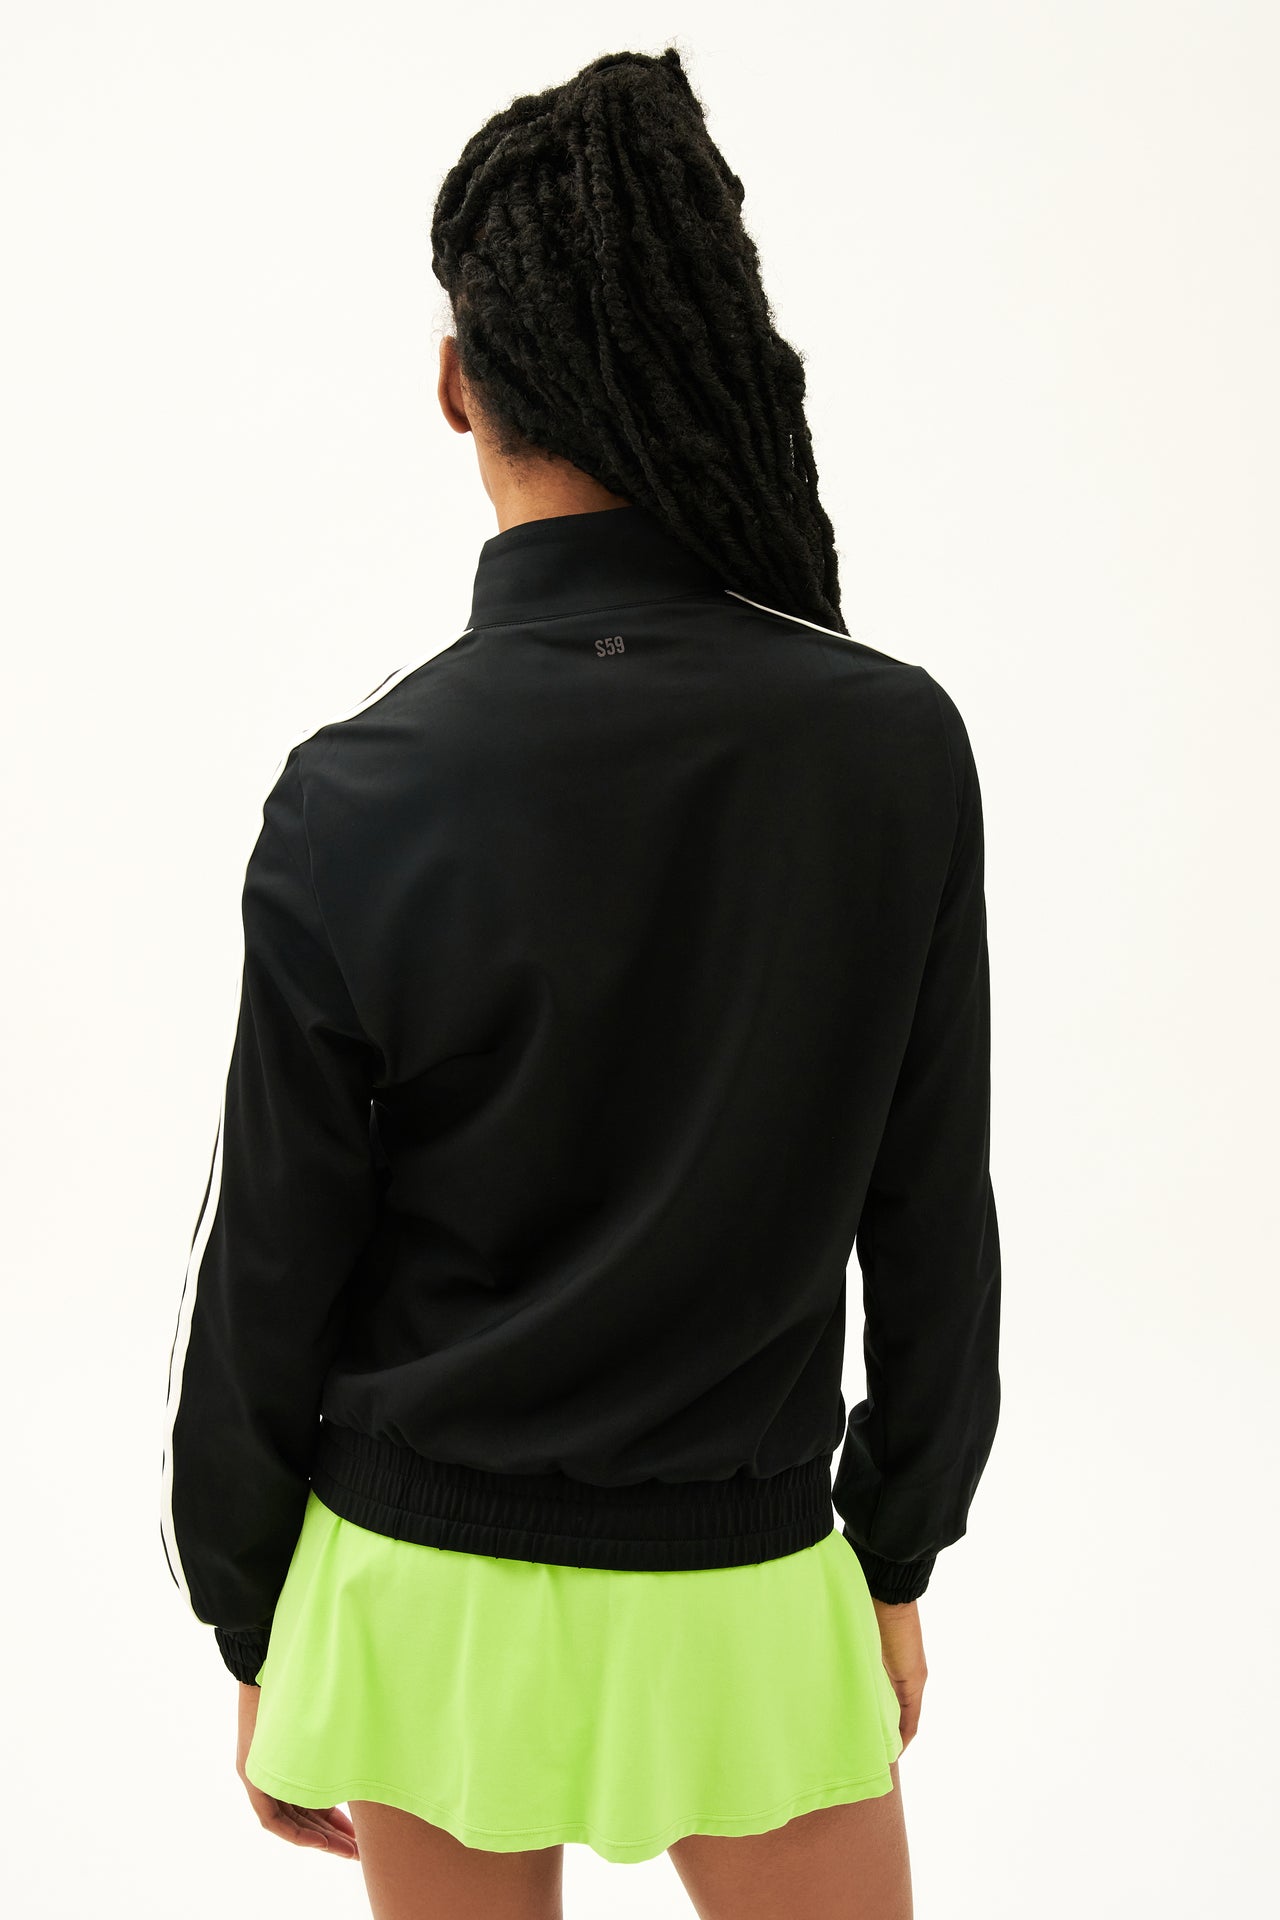 Back view of girl wearing black zip jacket that stops under chin with two white stripes down the side  with a  green skirt